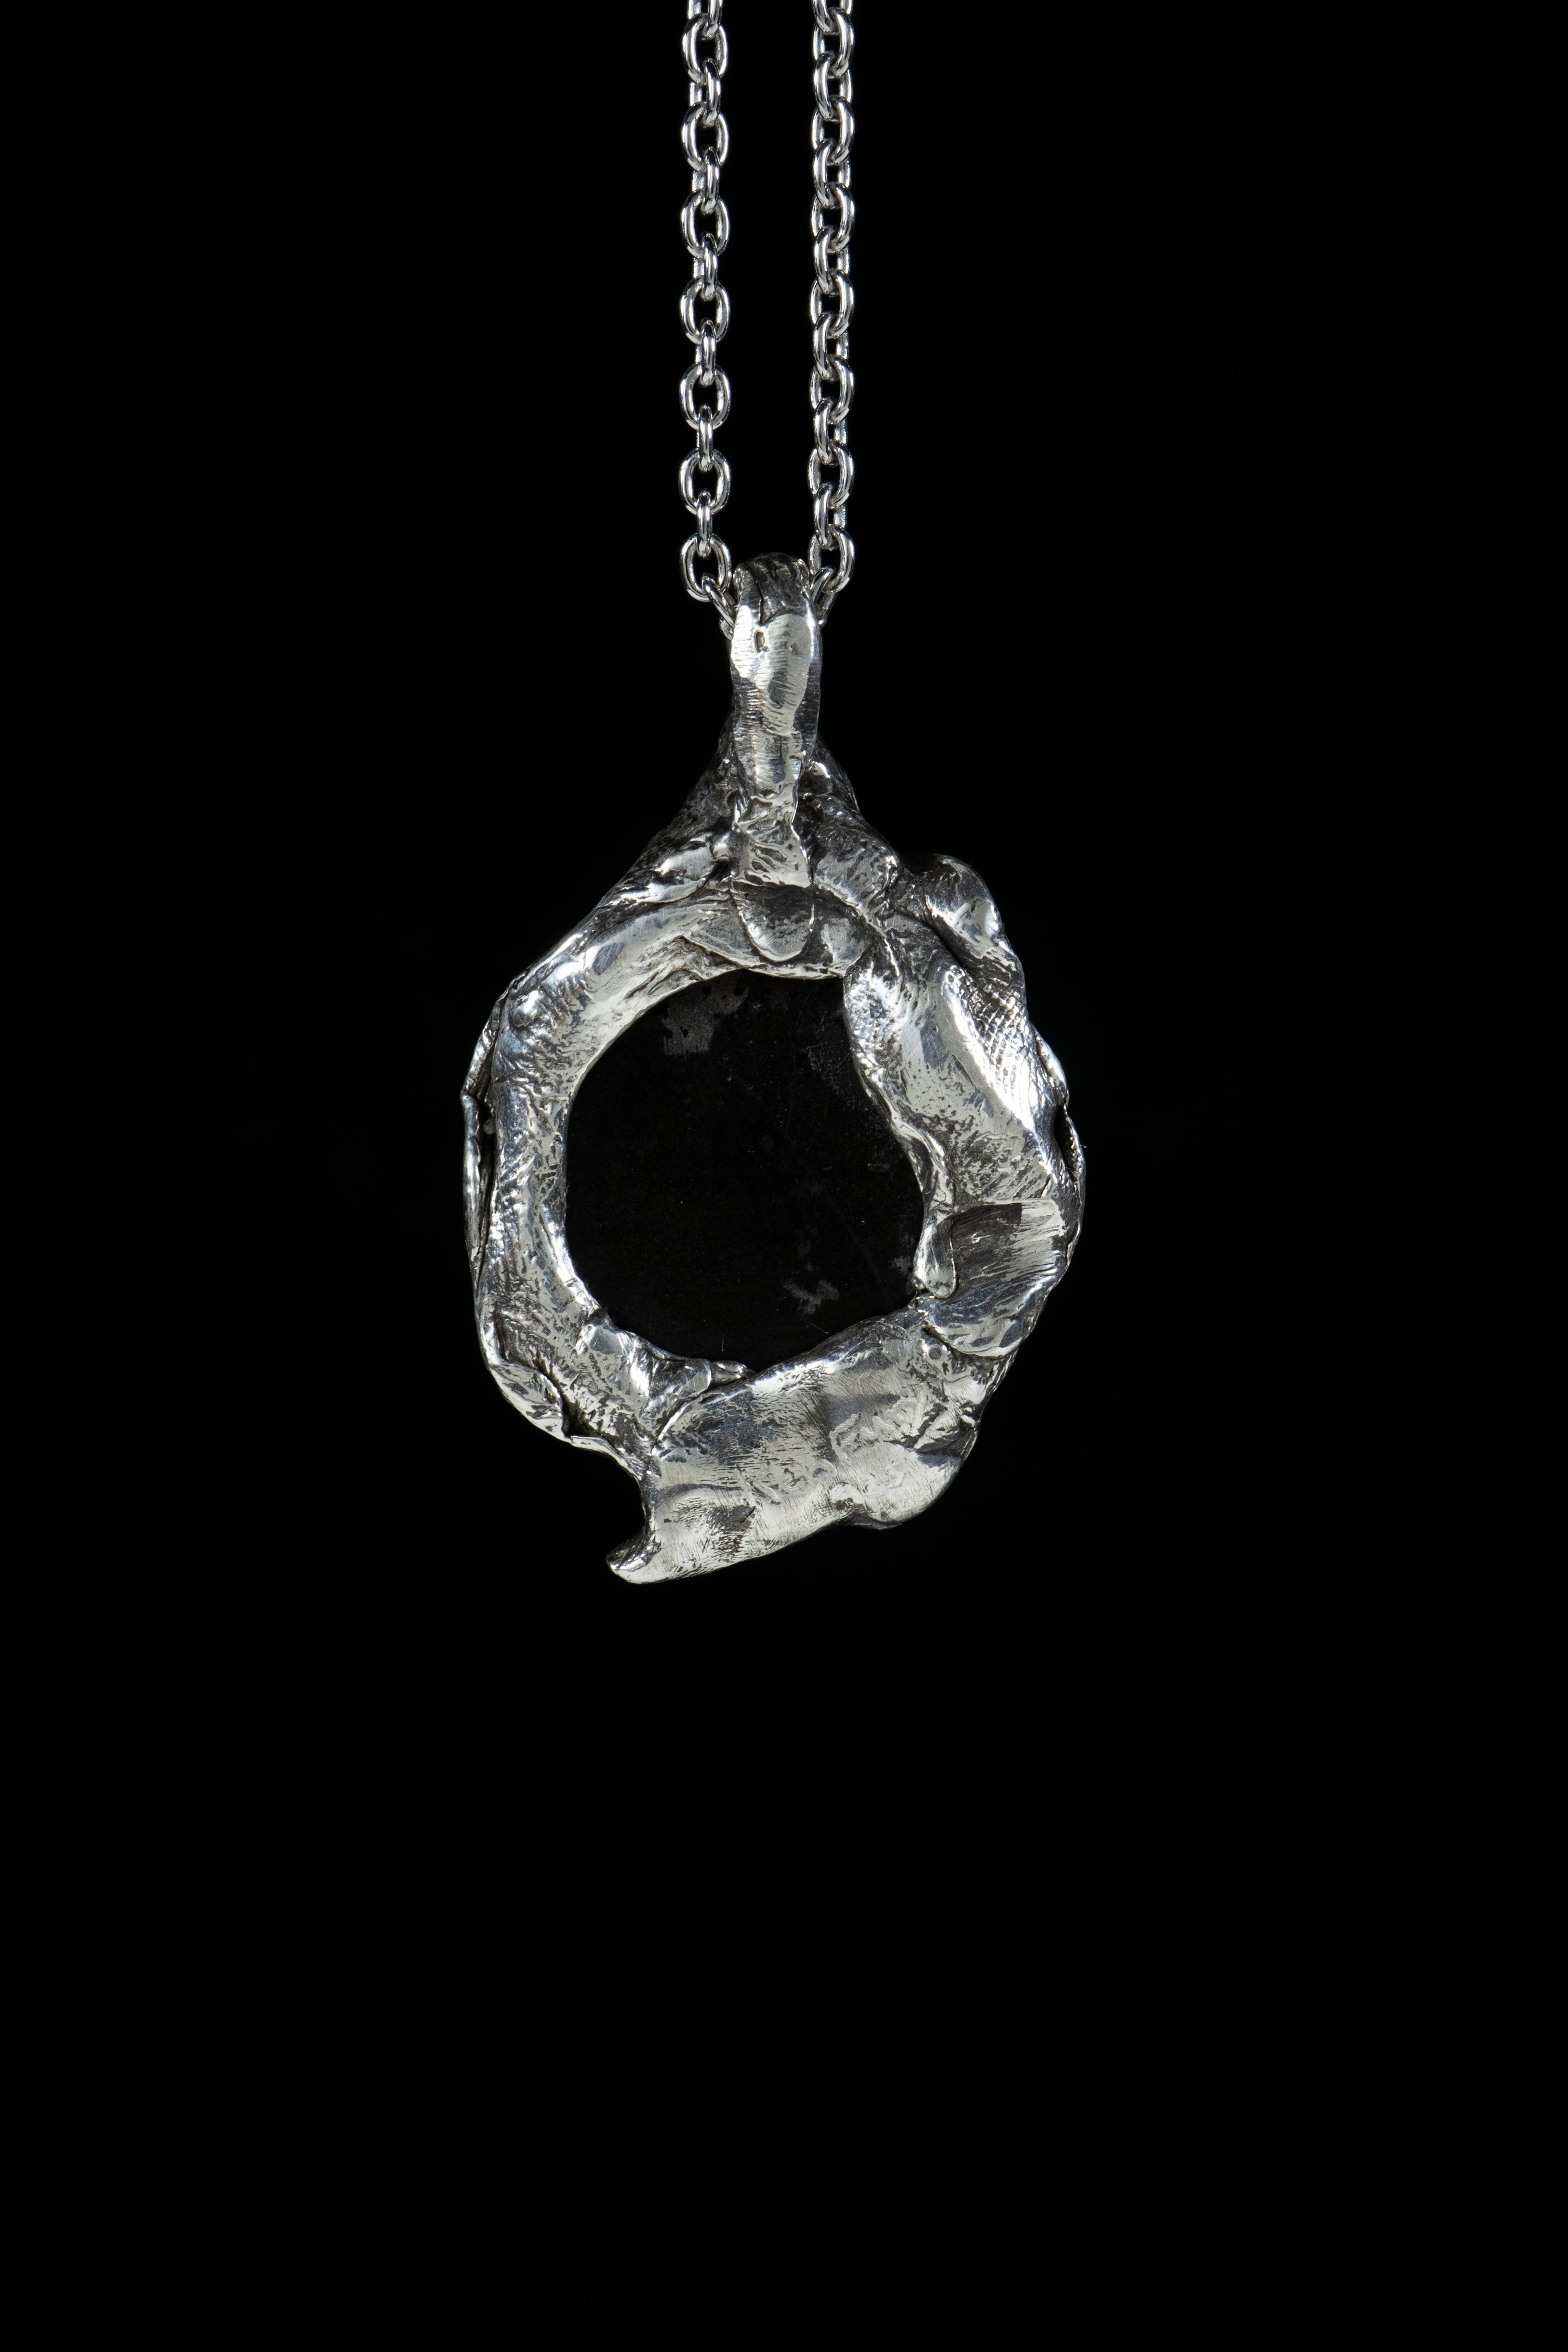 Human to Tree (White Buffalo Turquoise, Sterling Silver Pendant)